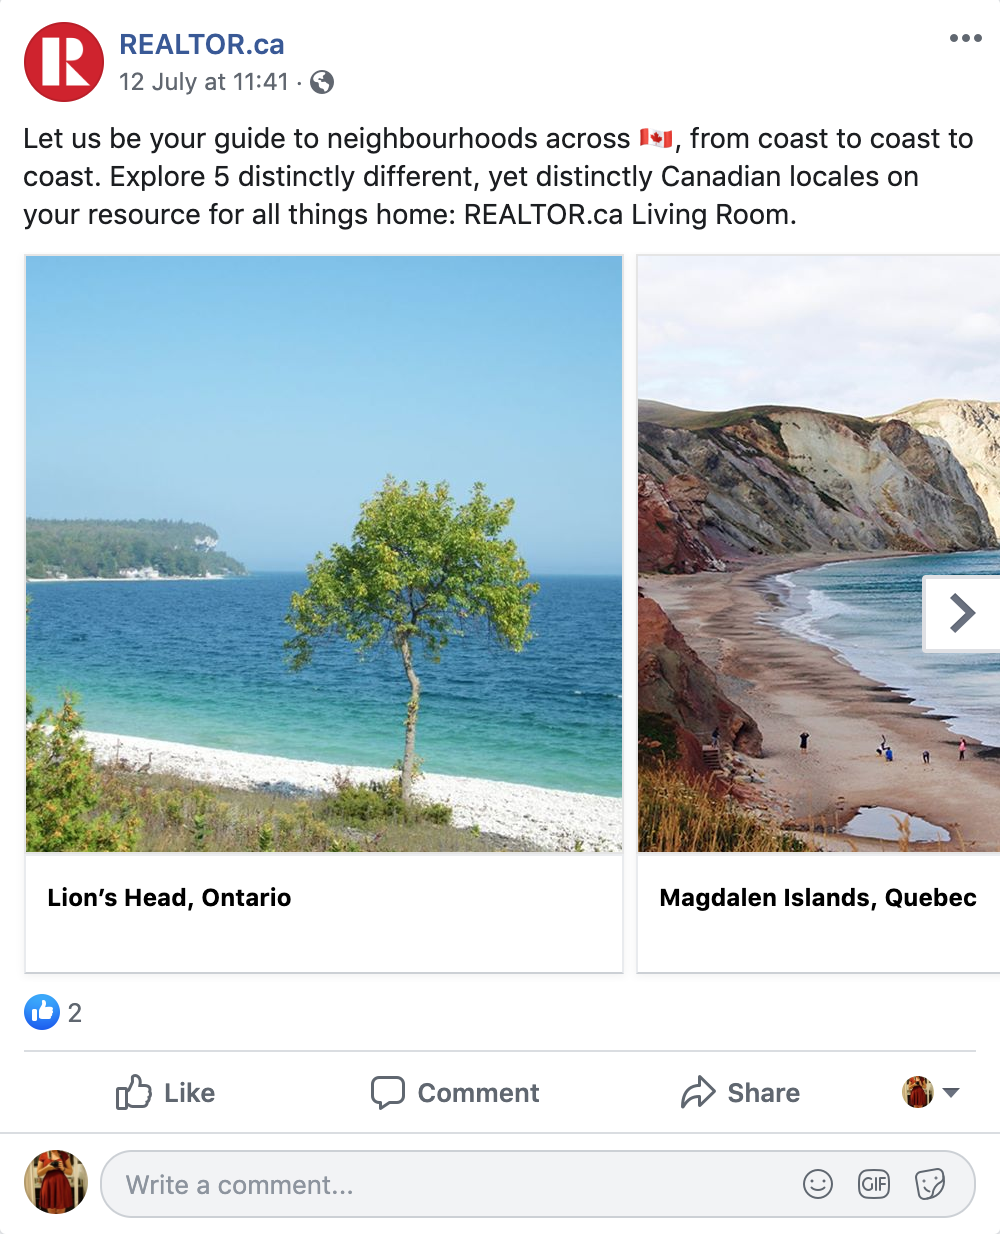 Increasing Organic Engagement on Facebook with Unique Post Types